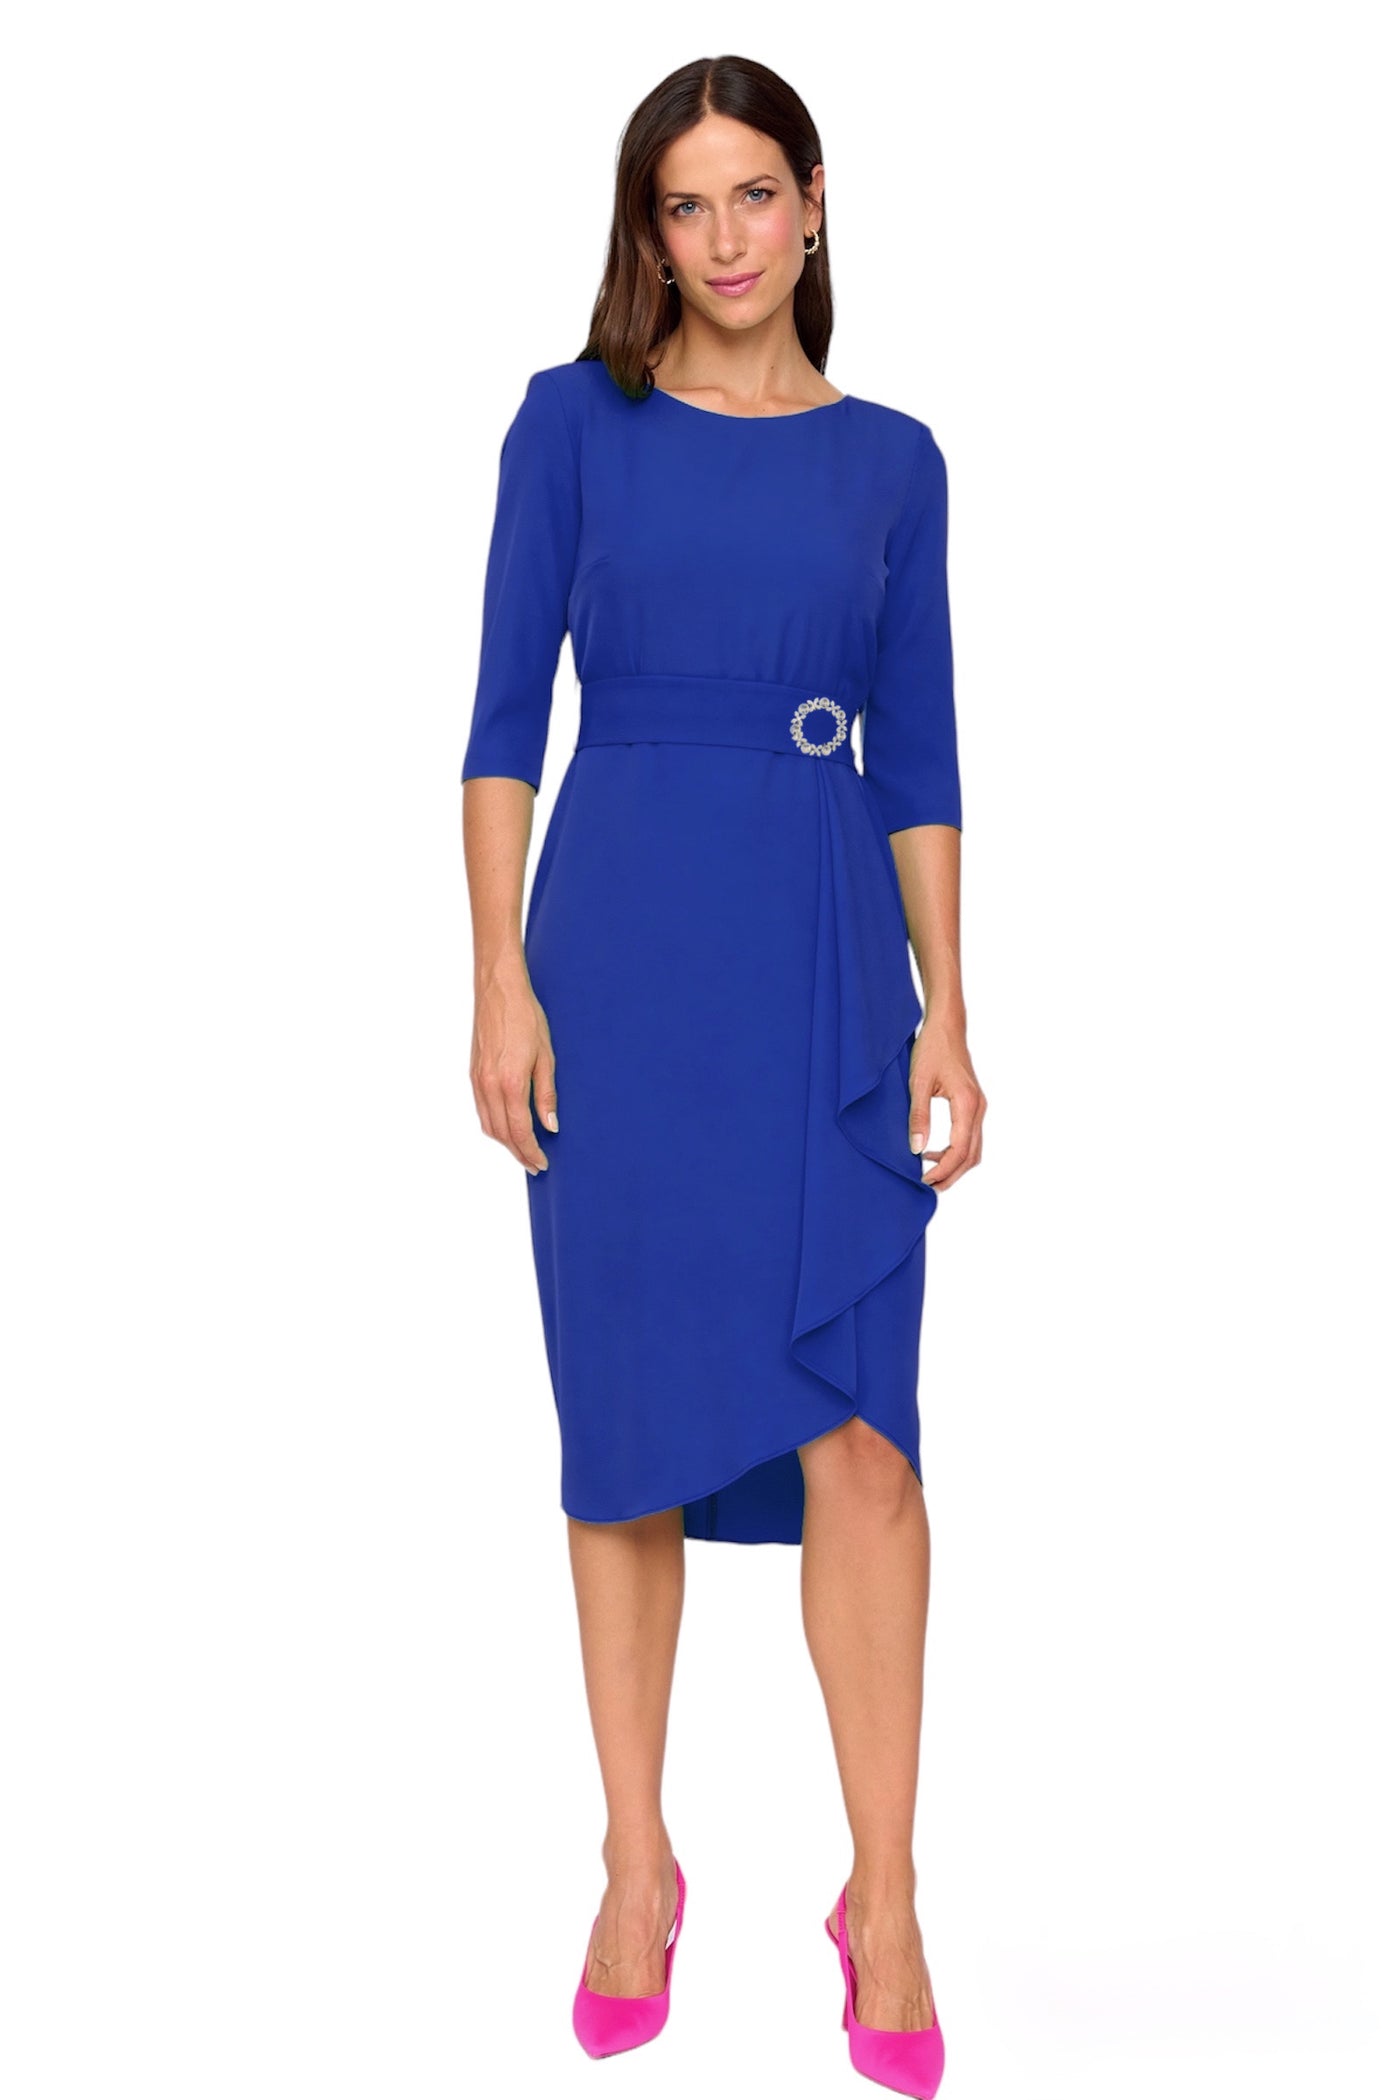 Royal Blue Dress with 3/4 Sleeve and Diamonte Broach